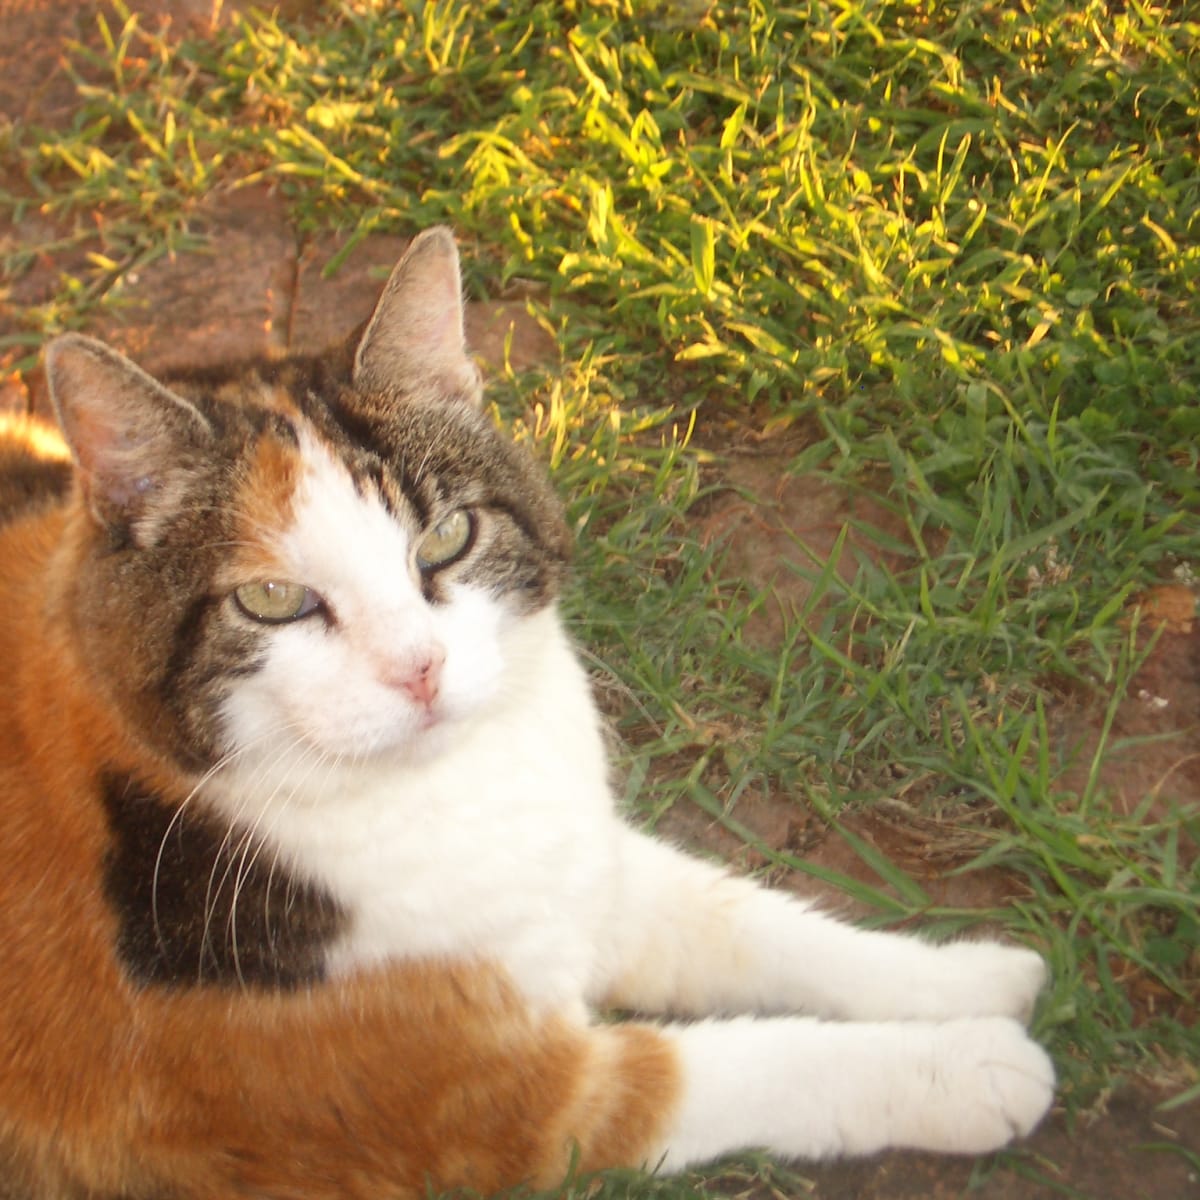 30 Great Names For A Calico Or Tortoiseshell Cat Pethelpful By Fellow Animal Lovers And Experts